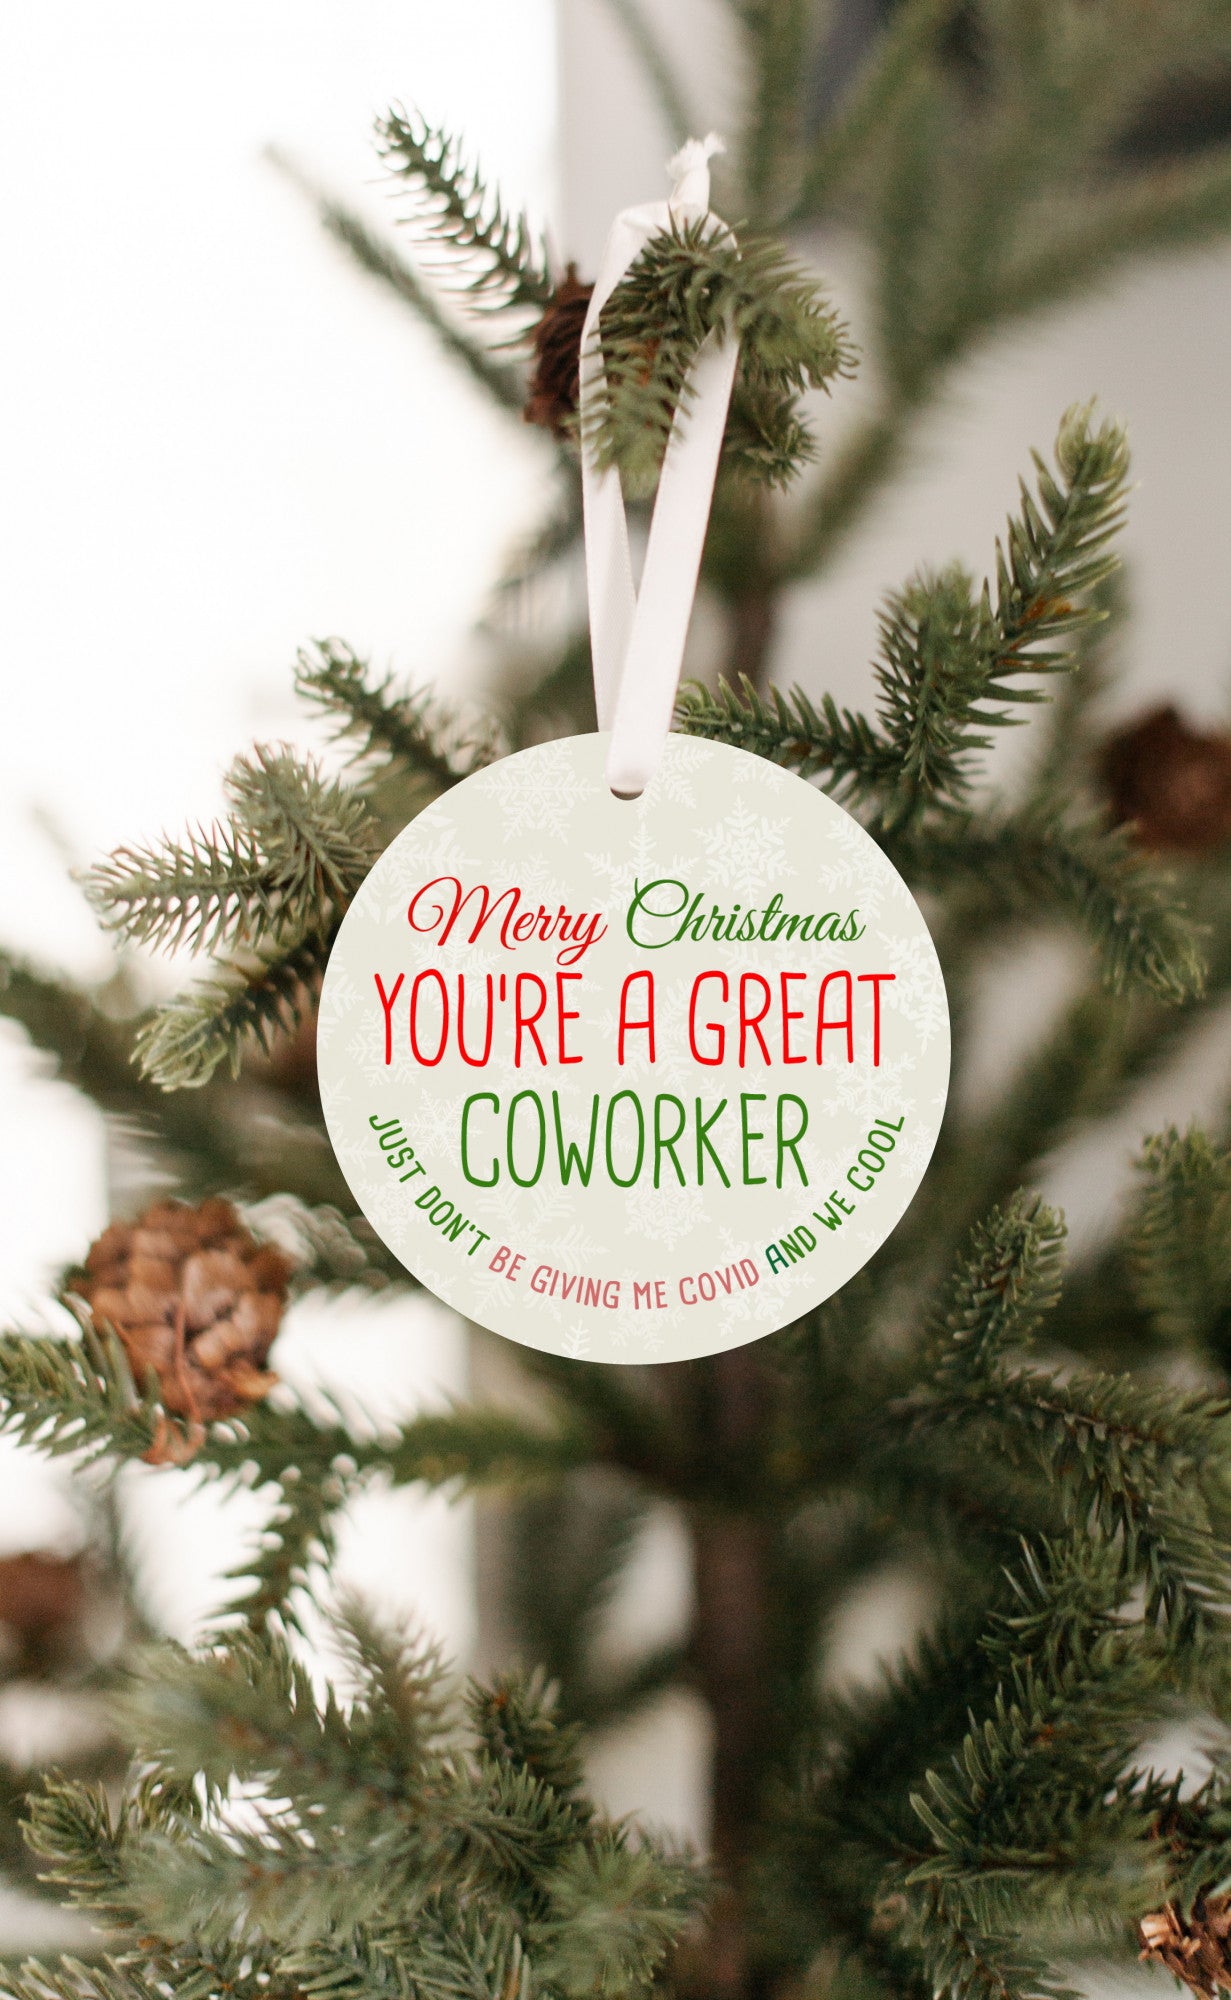 Coworker-Don't Give me Covid Ornament